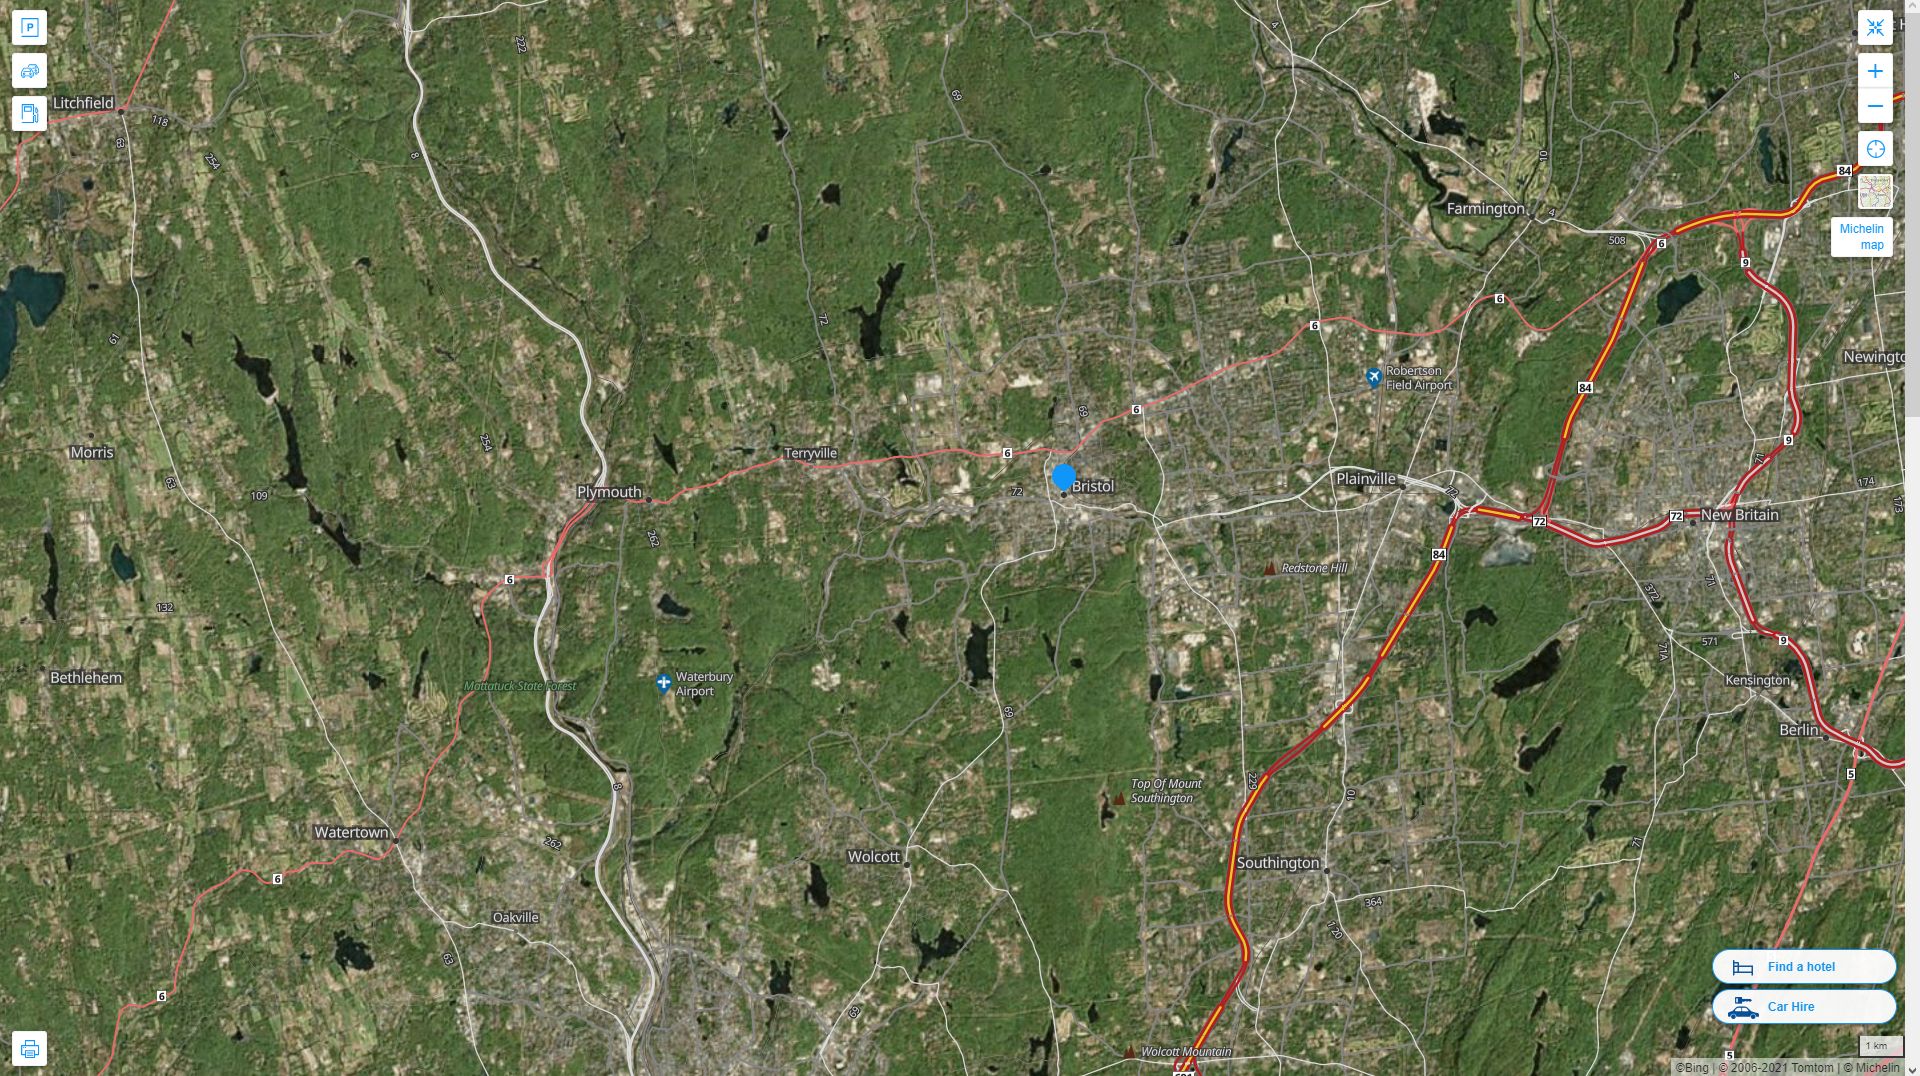 Bristol Connecticut Highway and Road Map with Satellite View